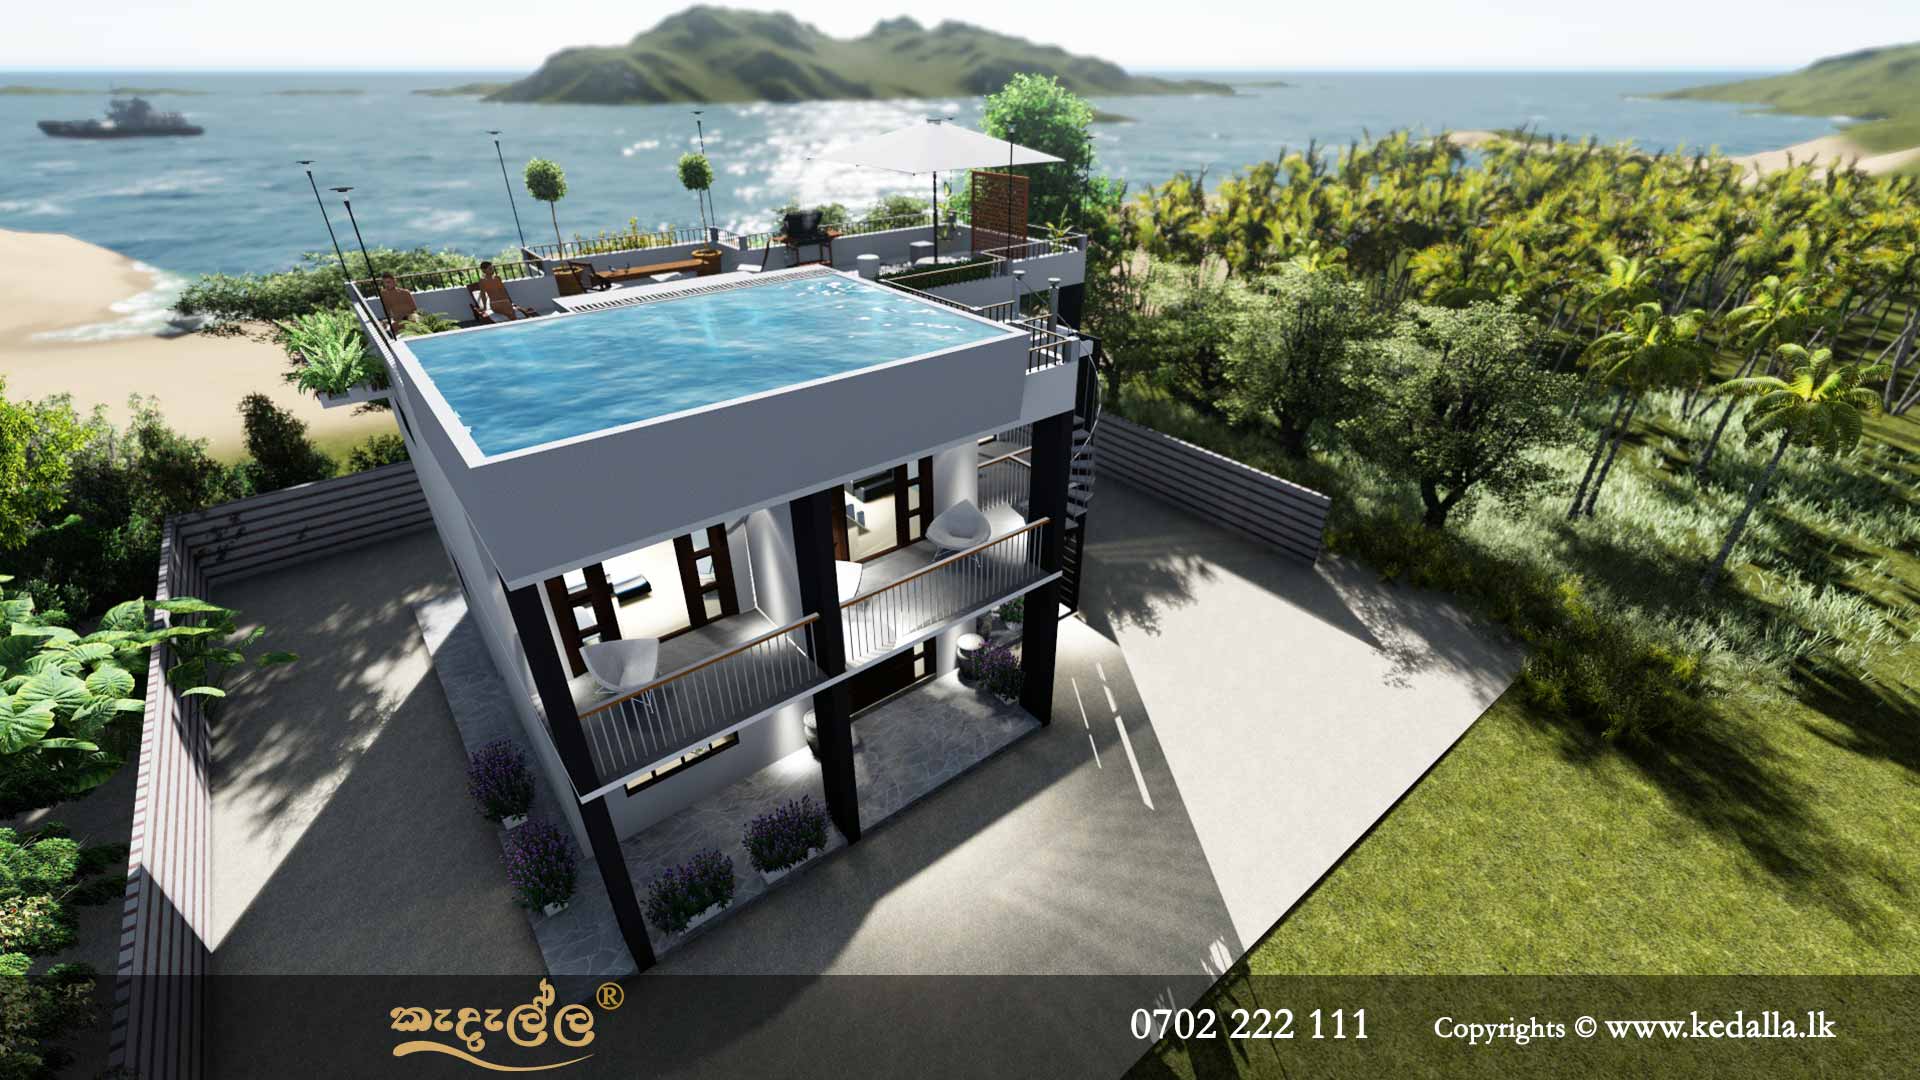 Two Story House Plans with annex and swimming pool on terrace/pool terrace in Sri Lanka